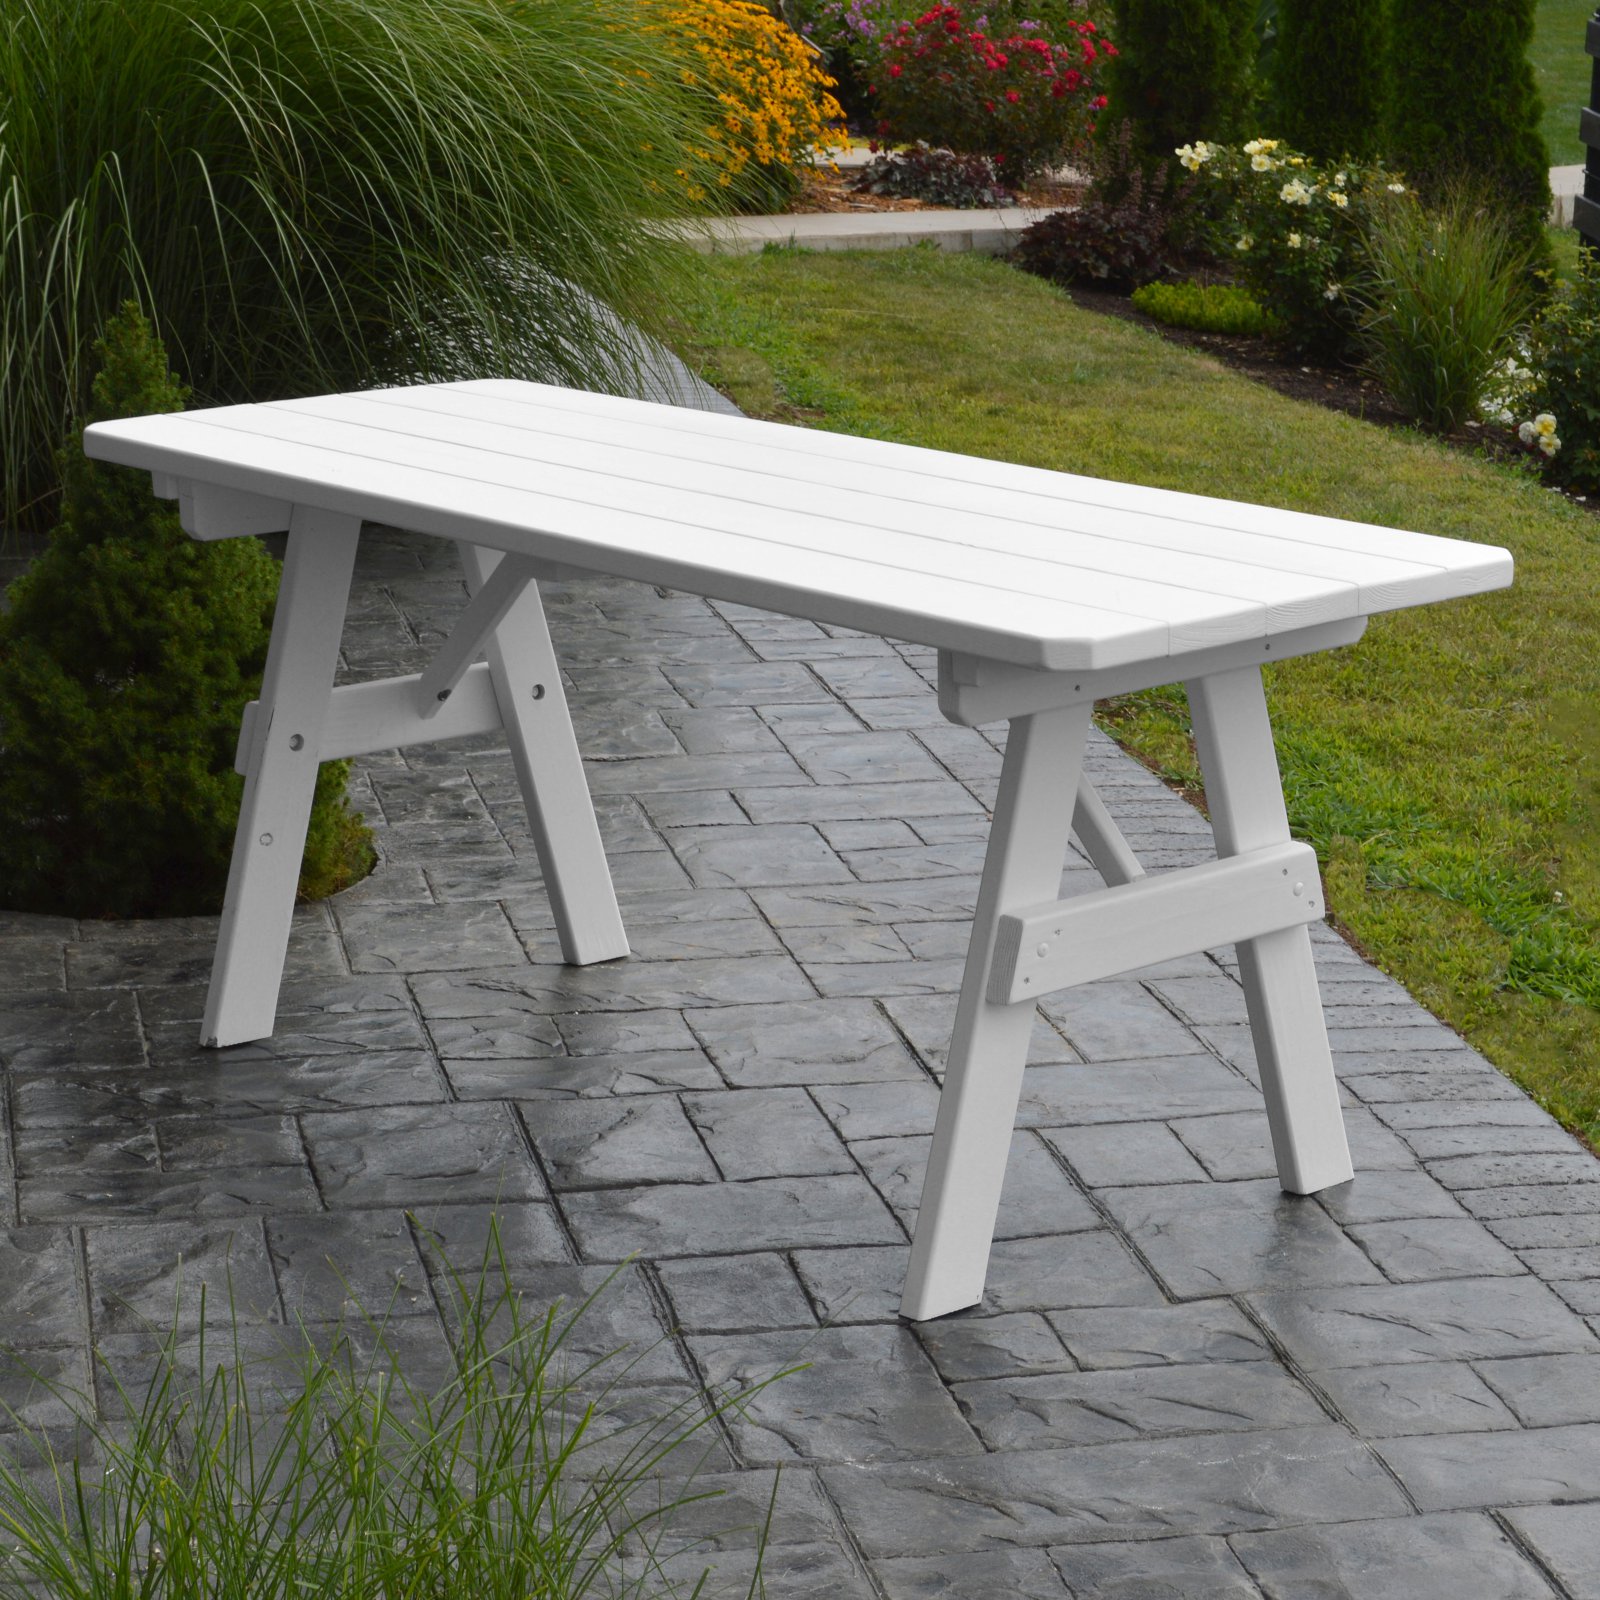 A &amp; L Furniture Yellow Pine Traditional Picnic Table - image 1 of 2